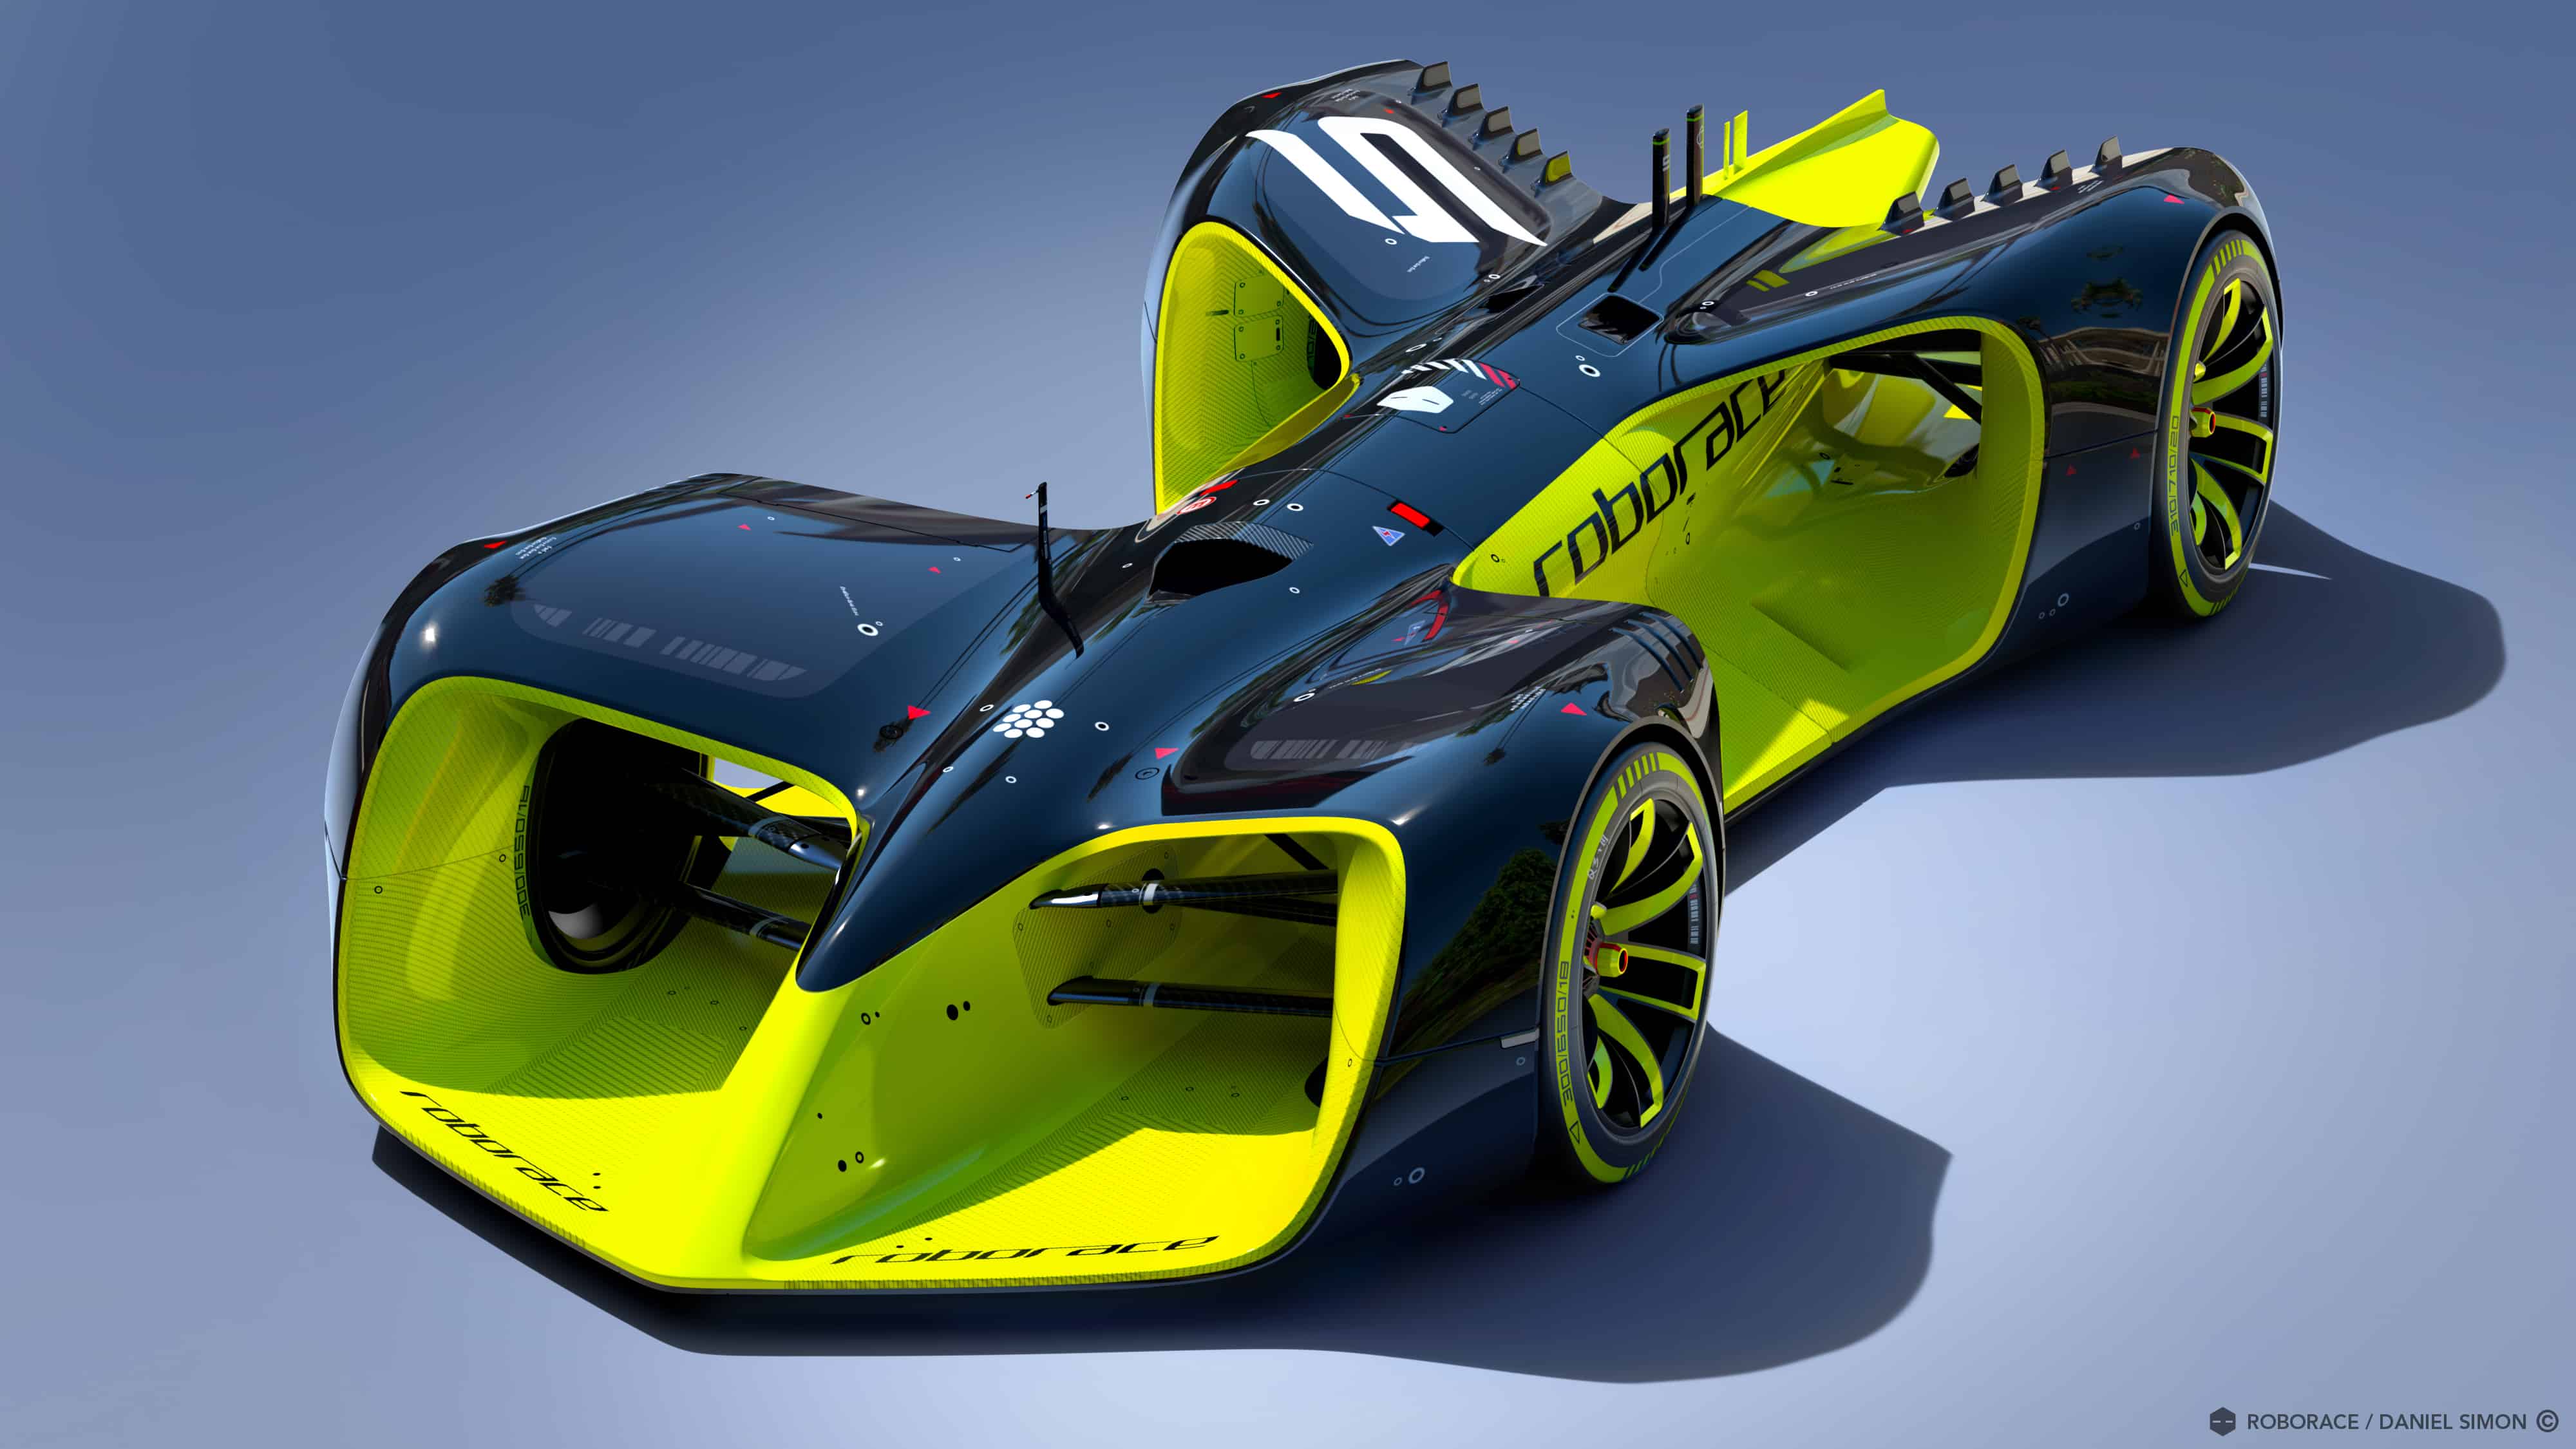 The racing-car of the future, coming soon to a street circuit near you. Image by Chief Design Officer Daniel Simon / Roborace Ltd.